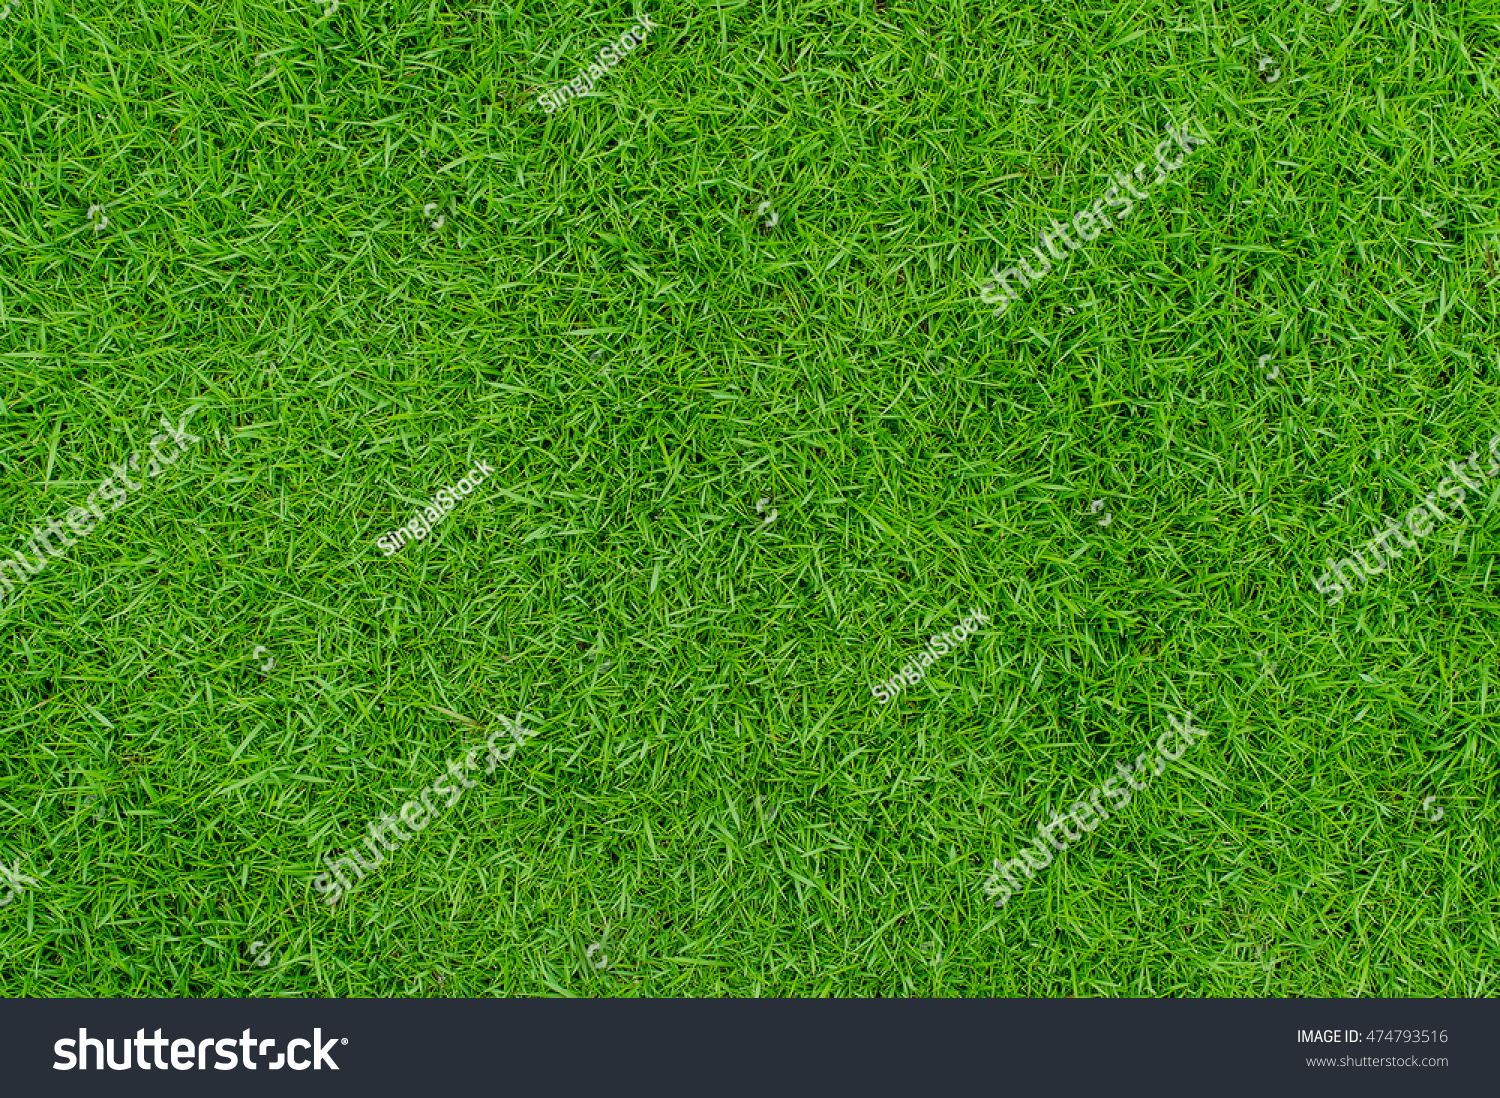 Green grass texture background Top view of bright grass garden Idea concept used for making green backdrop, lawn for training football pitch, Grass Golf Courses green lawn pattern textured background. #474793516